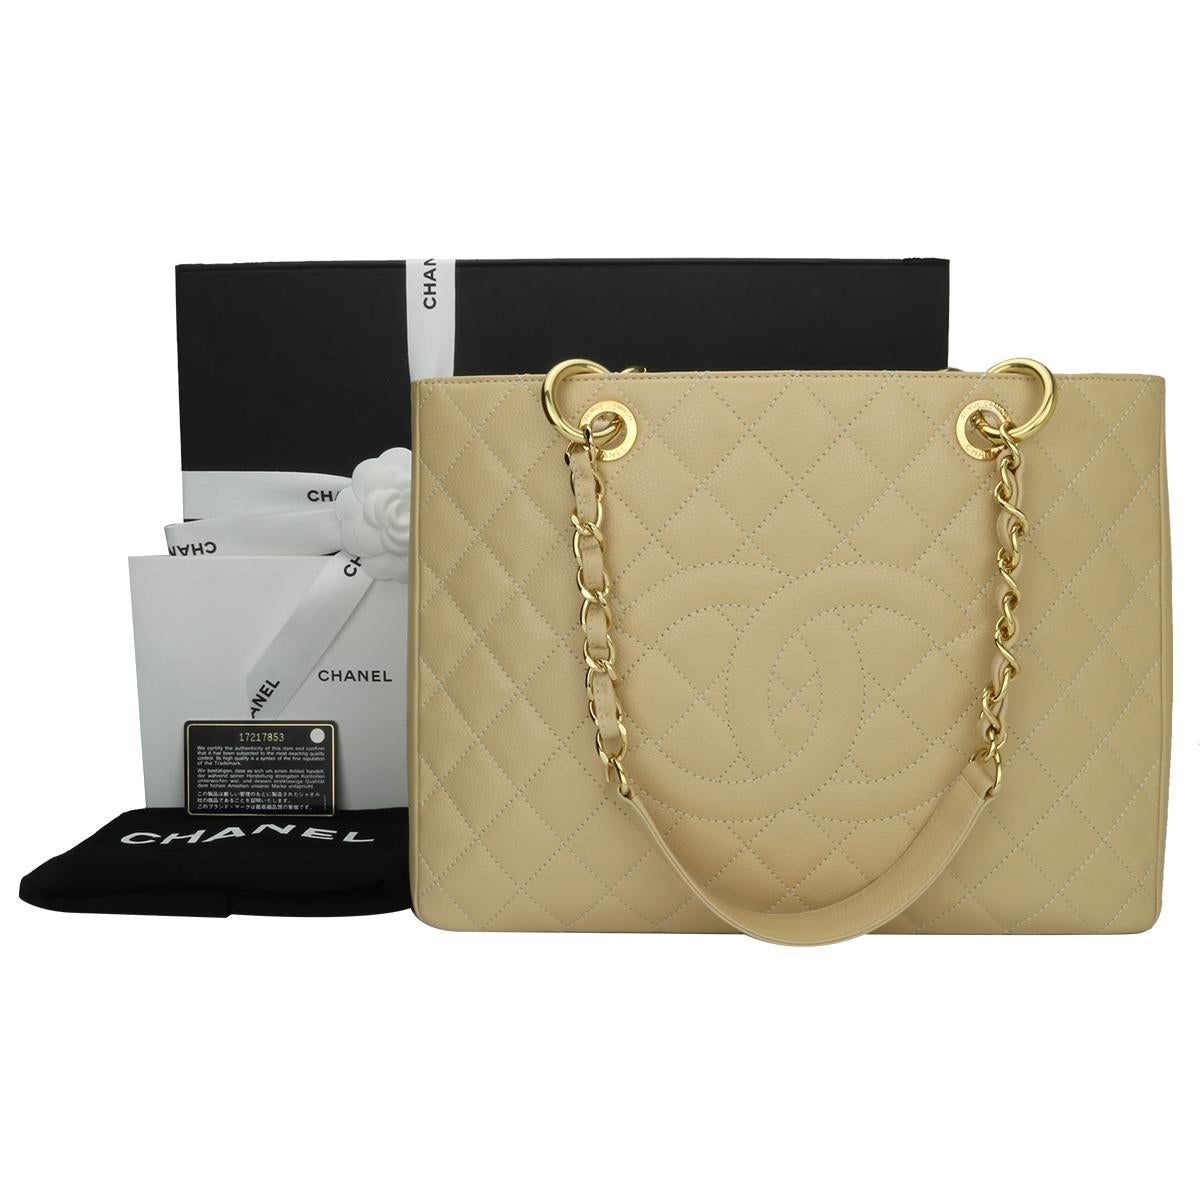 Authentic CHANEL Grand Shopping Tote (GST) Beige Clair Caviar with Gold Hardware 2013.

This bag is in mint condition, the bag still holds its original shape, and the hardware is still shiny.

Exterior Condition: Mint condition, left front corner